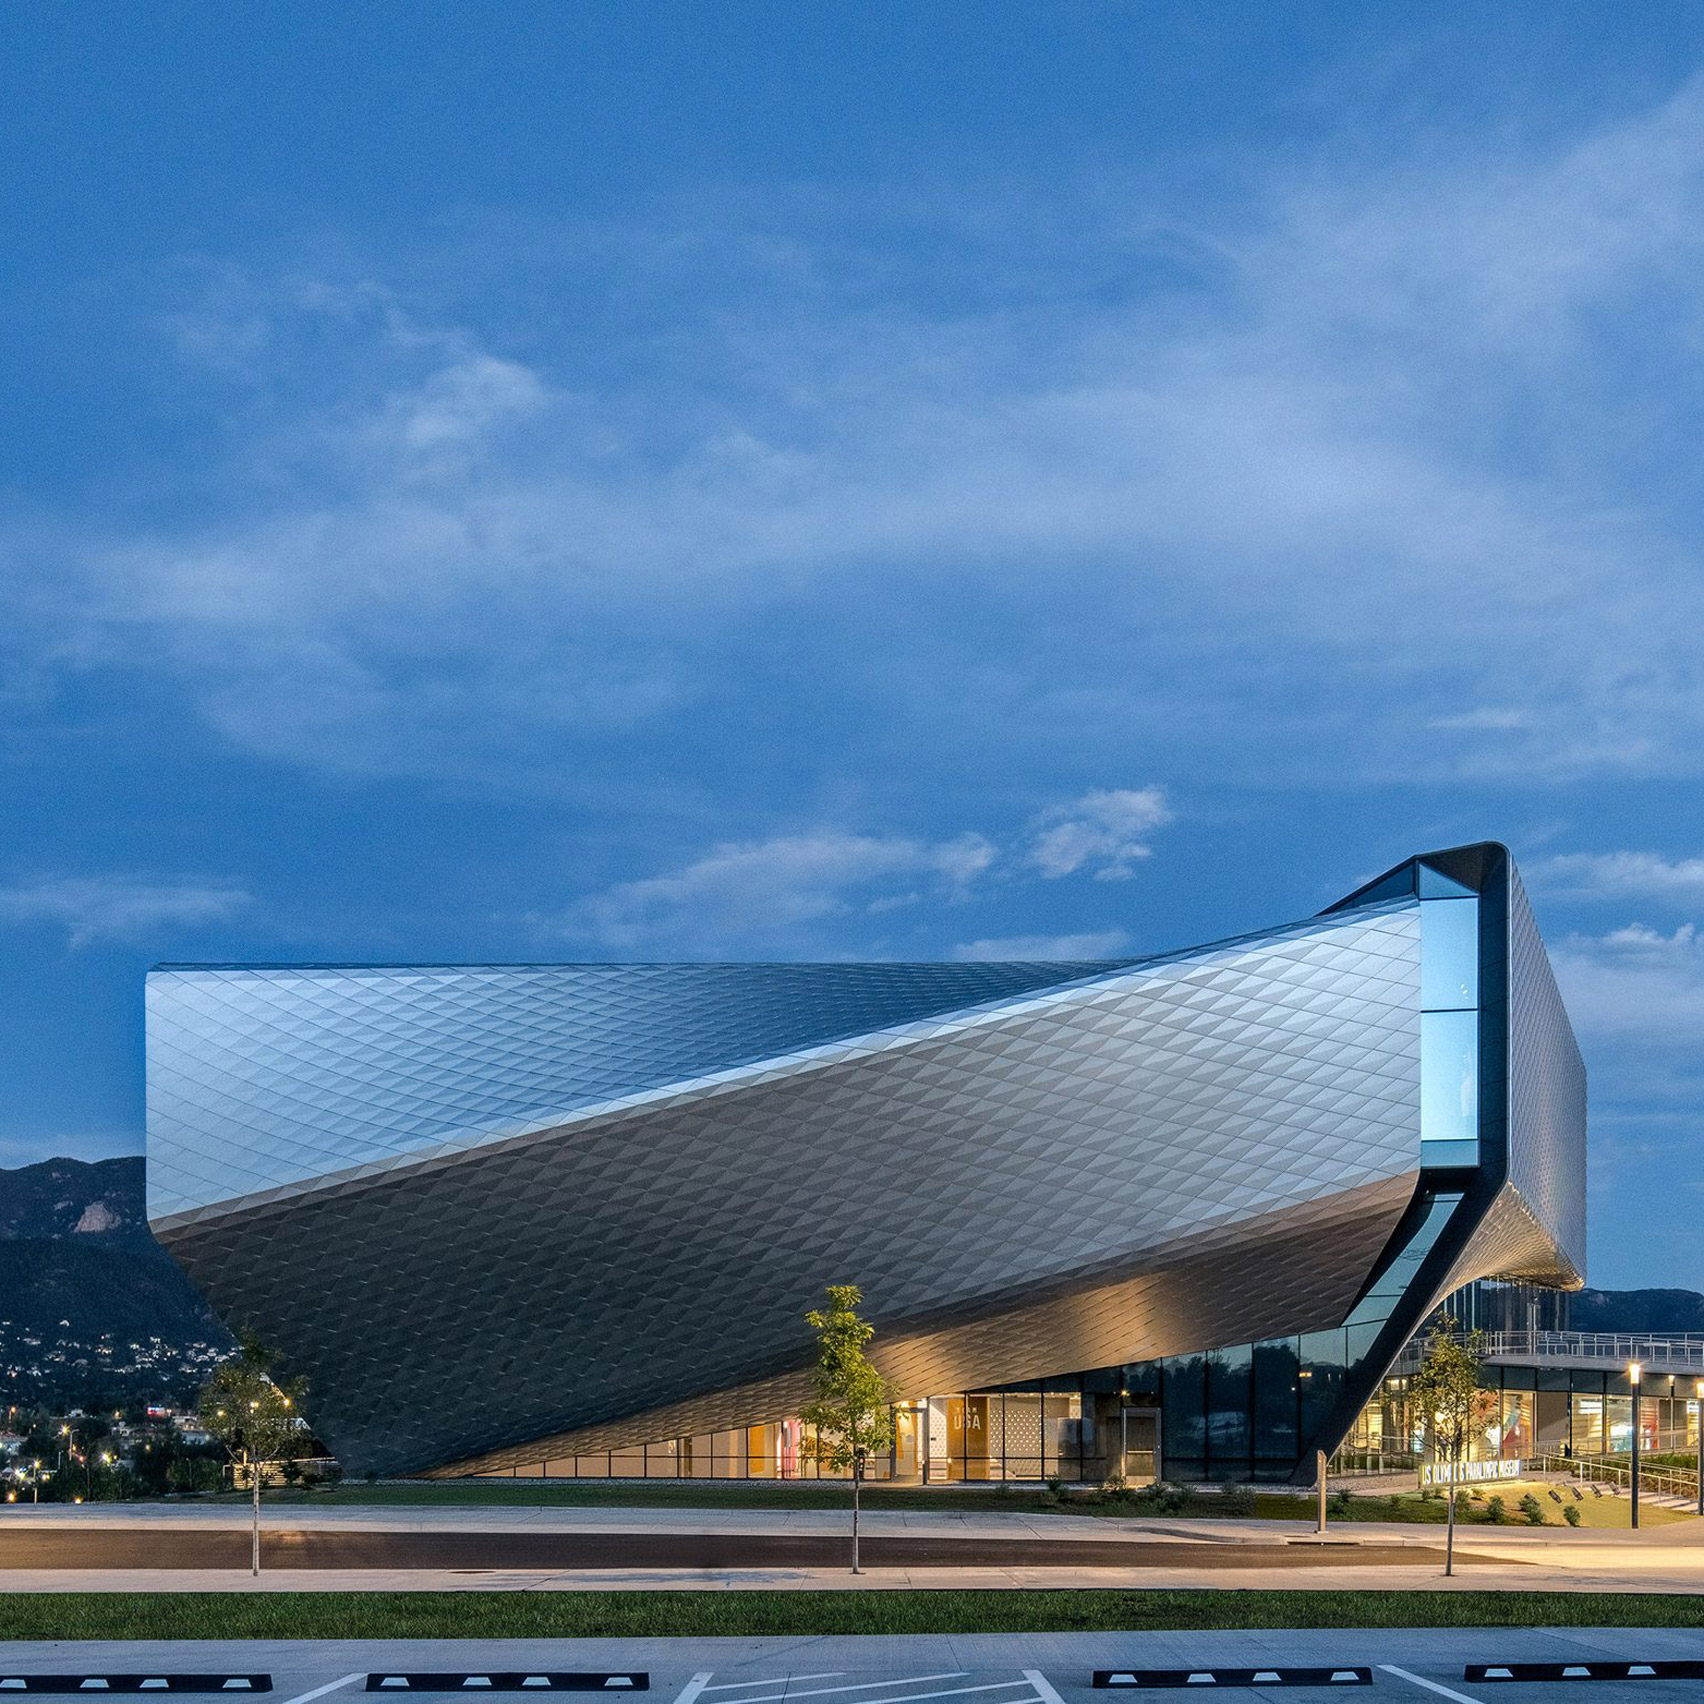 The exterior of US Olympic and Paralympic Museum, USA, by Diller Scofidio + Renfro